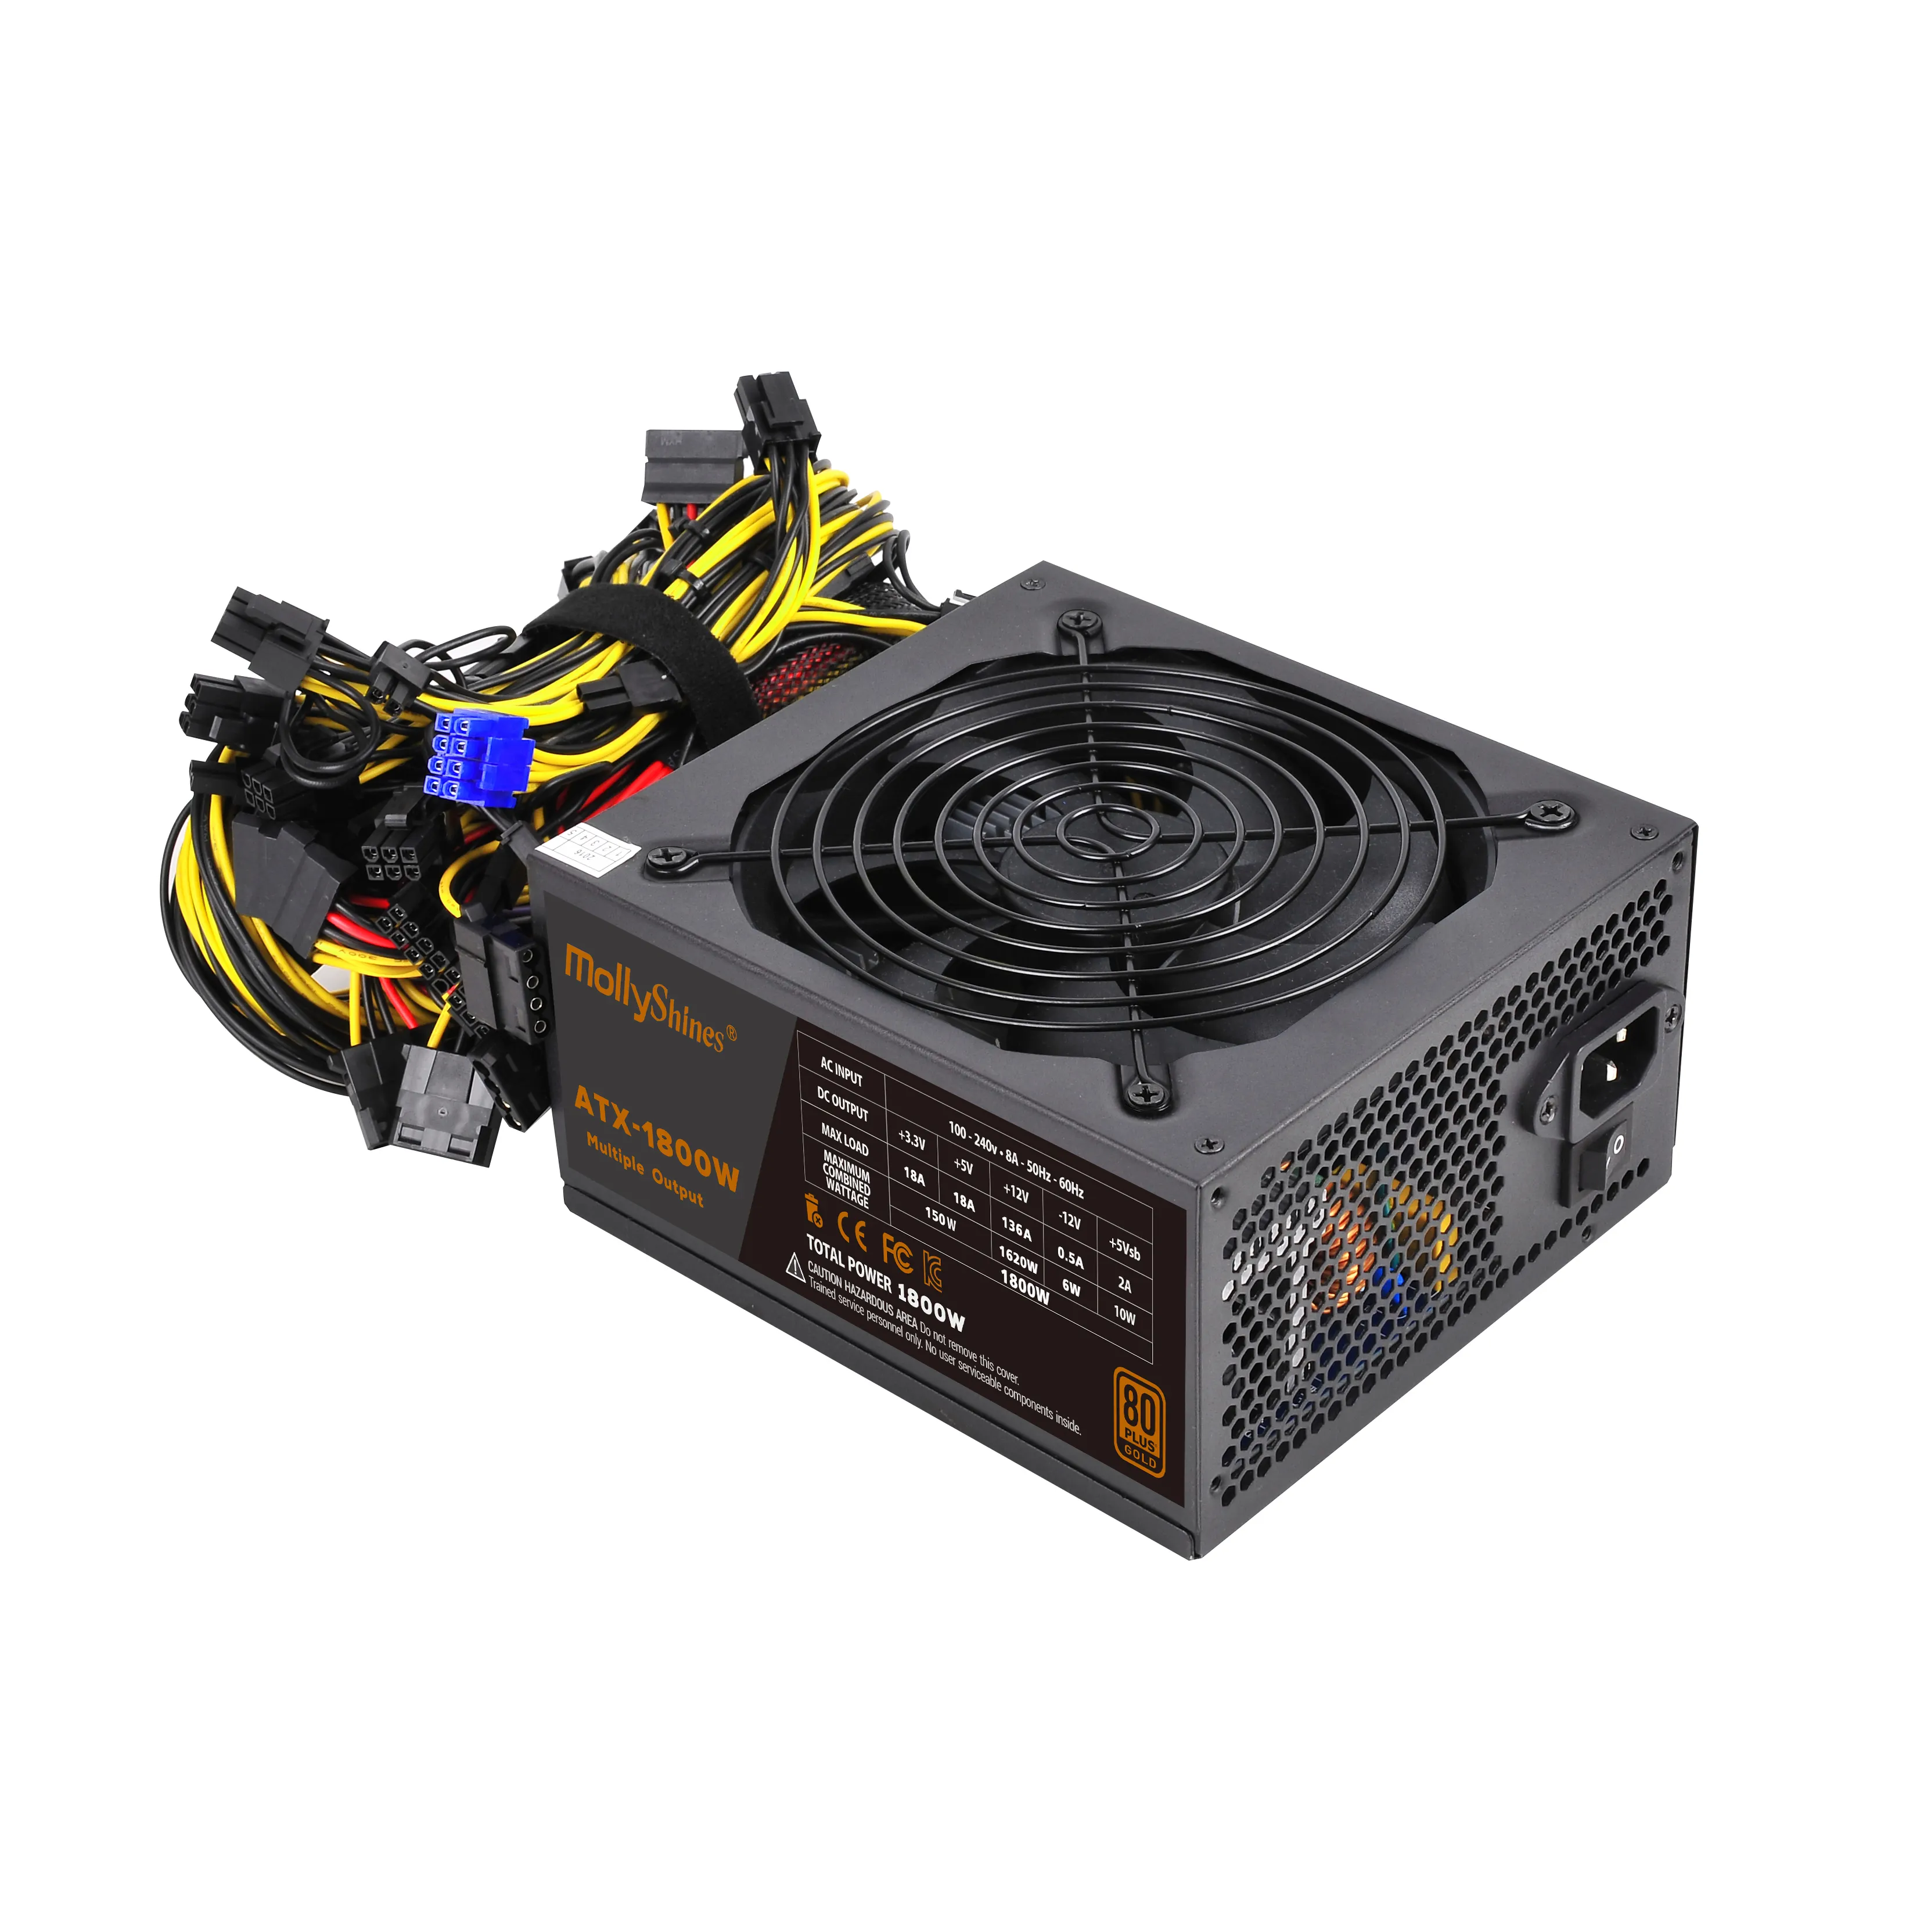 High Efficiency 80 Plus Gold Power Supply 1800W Multiple Outputs Power For VGA Card SP